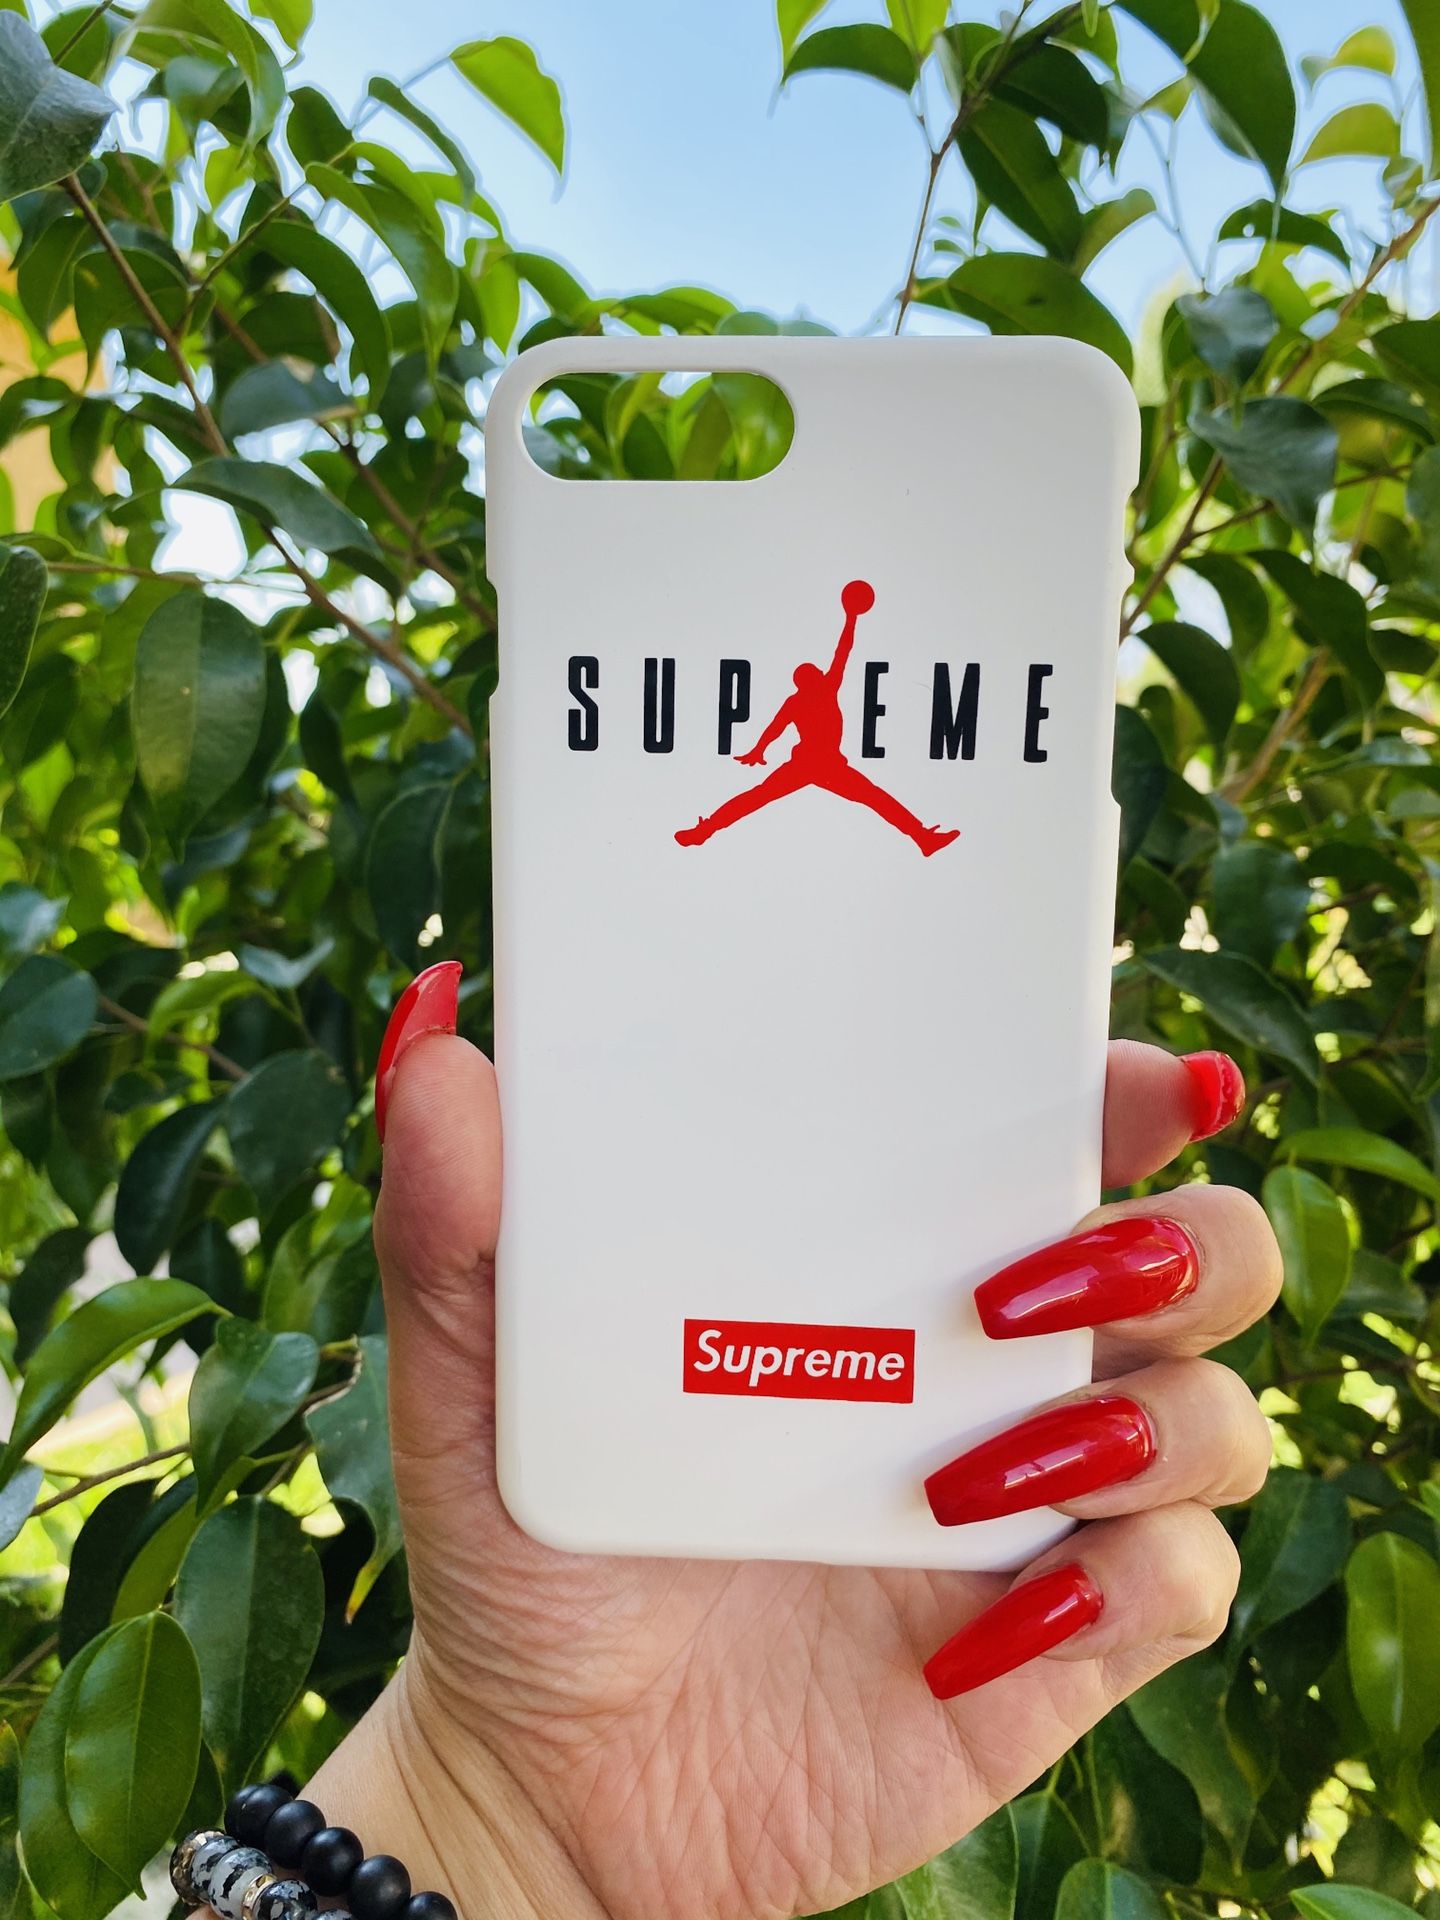 Brand new cool iphone 7+ or 8+ PLUS case cover slim fit hard sleeve case light weight supreme Jordan collab white